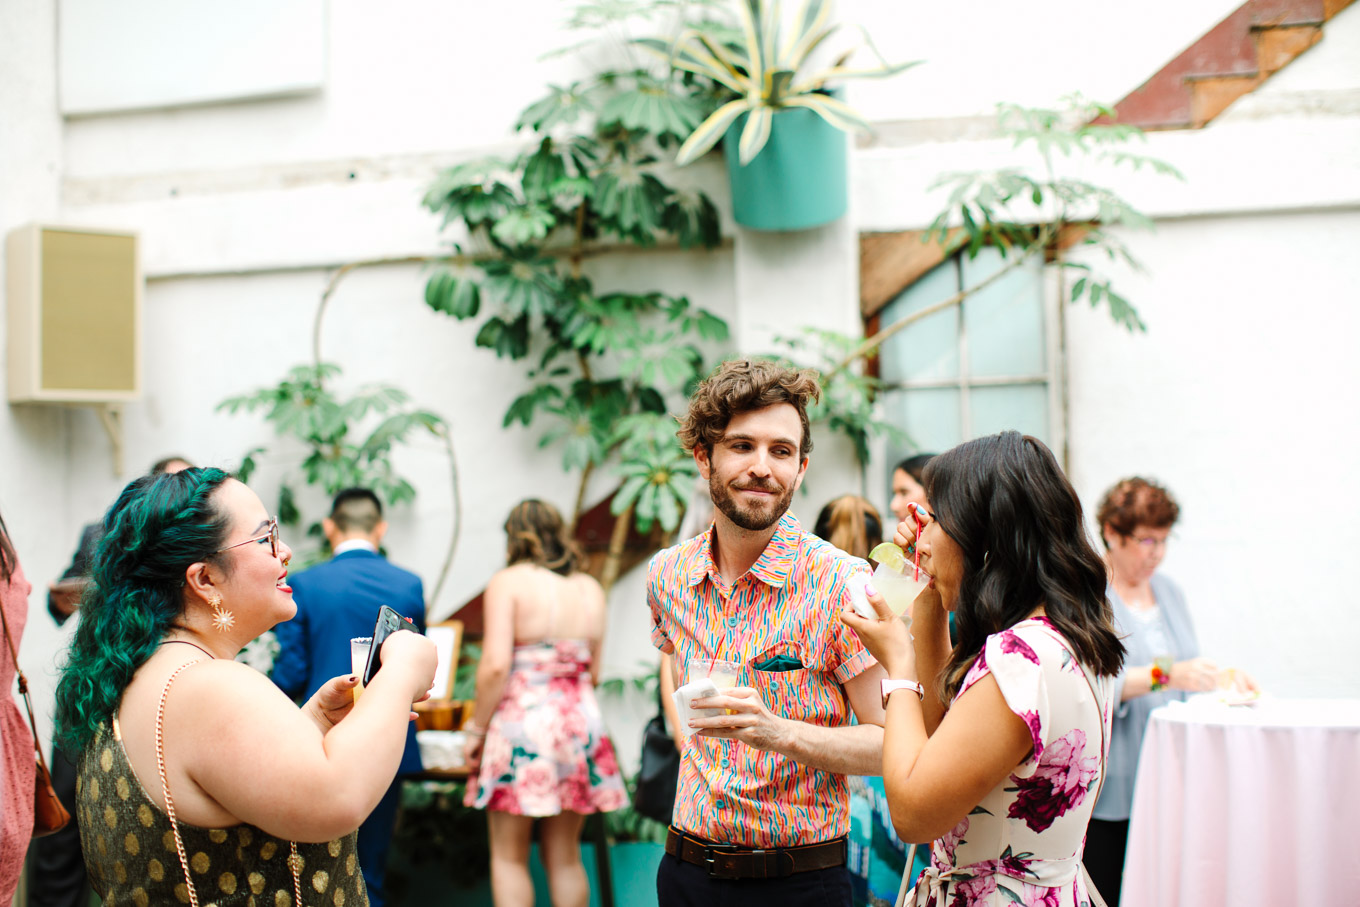 Guests enjoying cocktail hour | Colorful Downtown Los Angeles Valentine Wedding | Los Angeles wedding photographer | #losangeleswedding #colorfulwedding #DTLA #valentinedtla   Source: Mary Costa Photography | Los Angeles